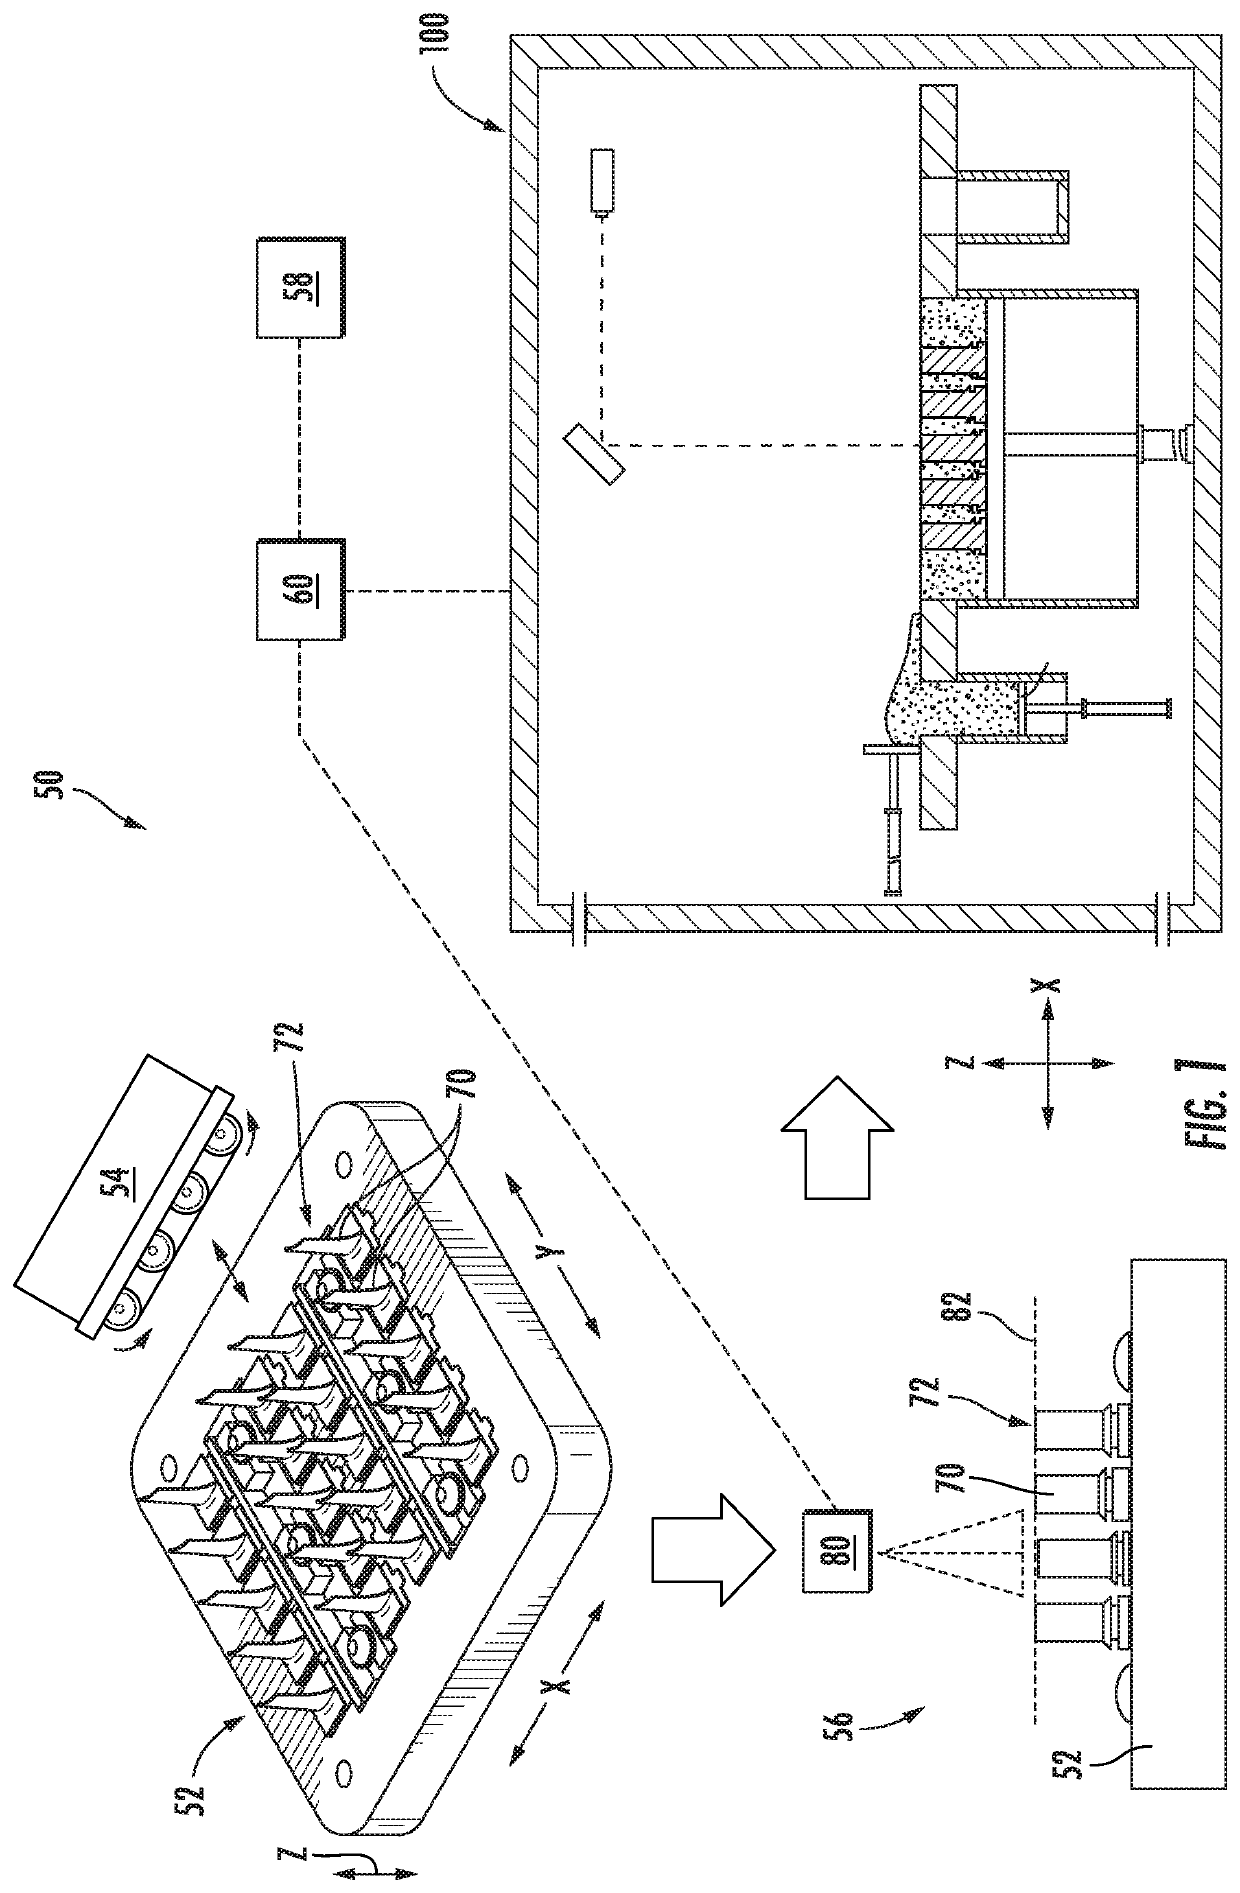 Tooling Assembly for Decreasing Powder Usage in a Powder Bed Additive Manufacturing Process